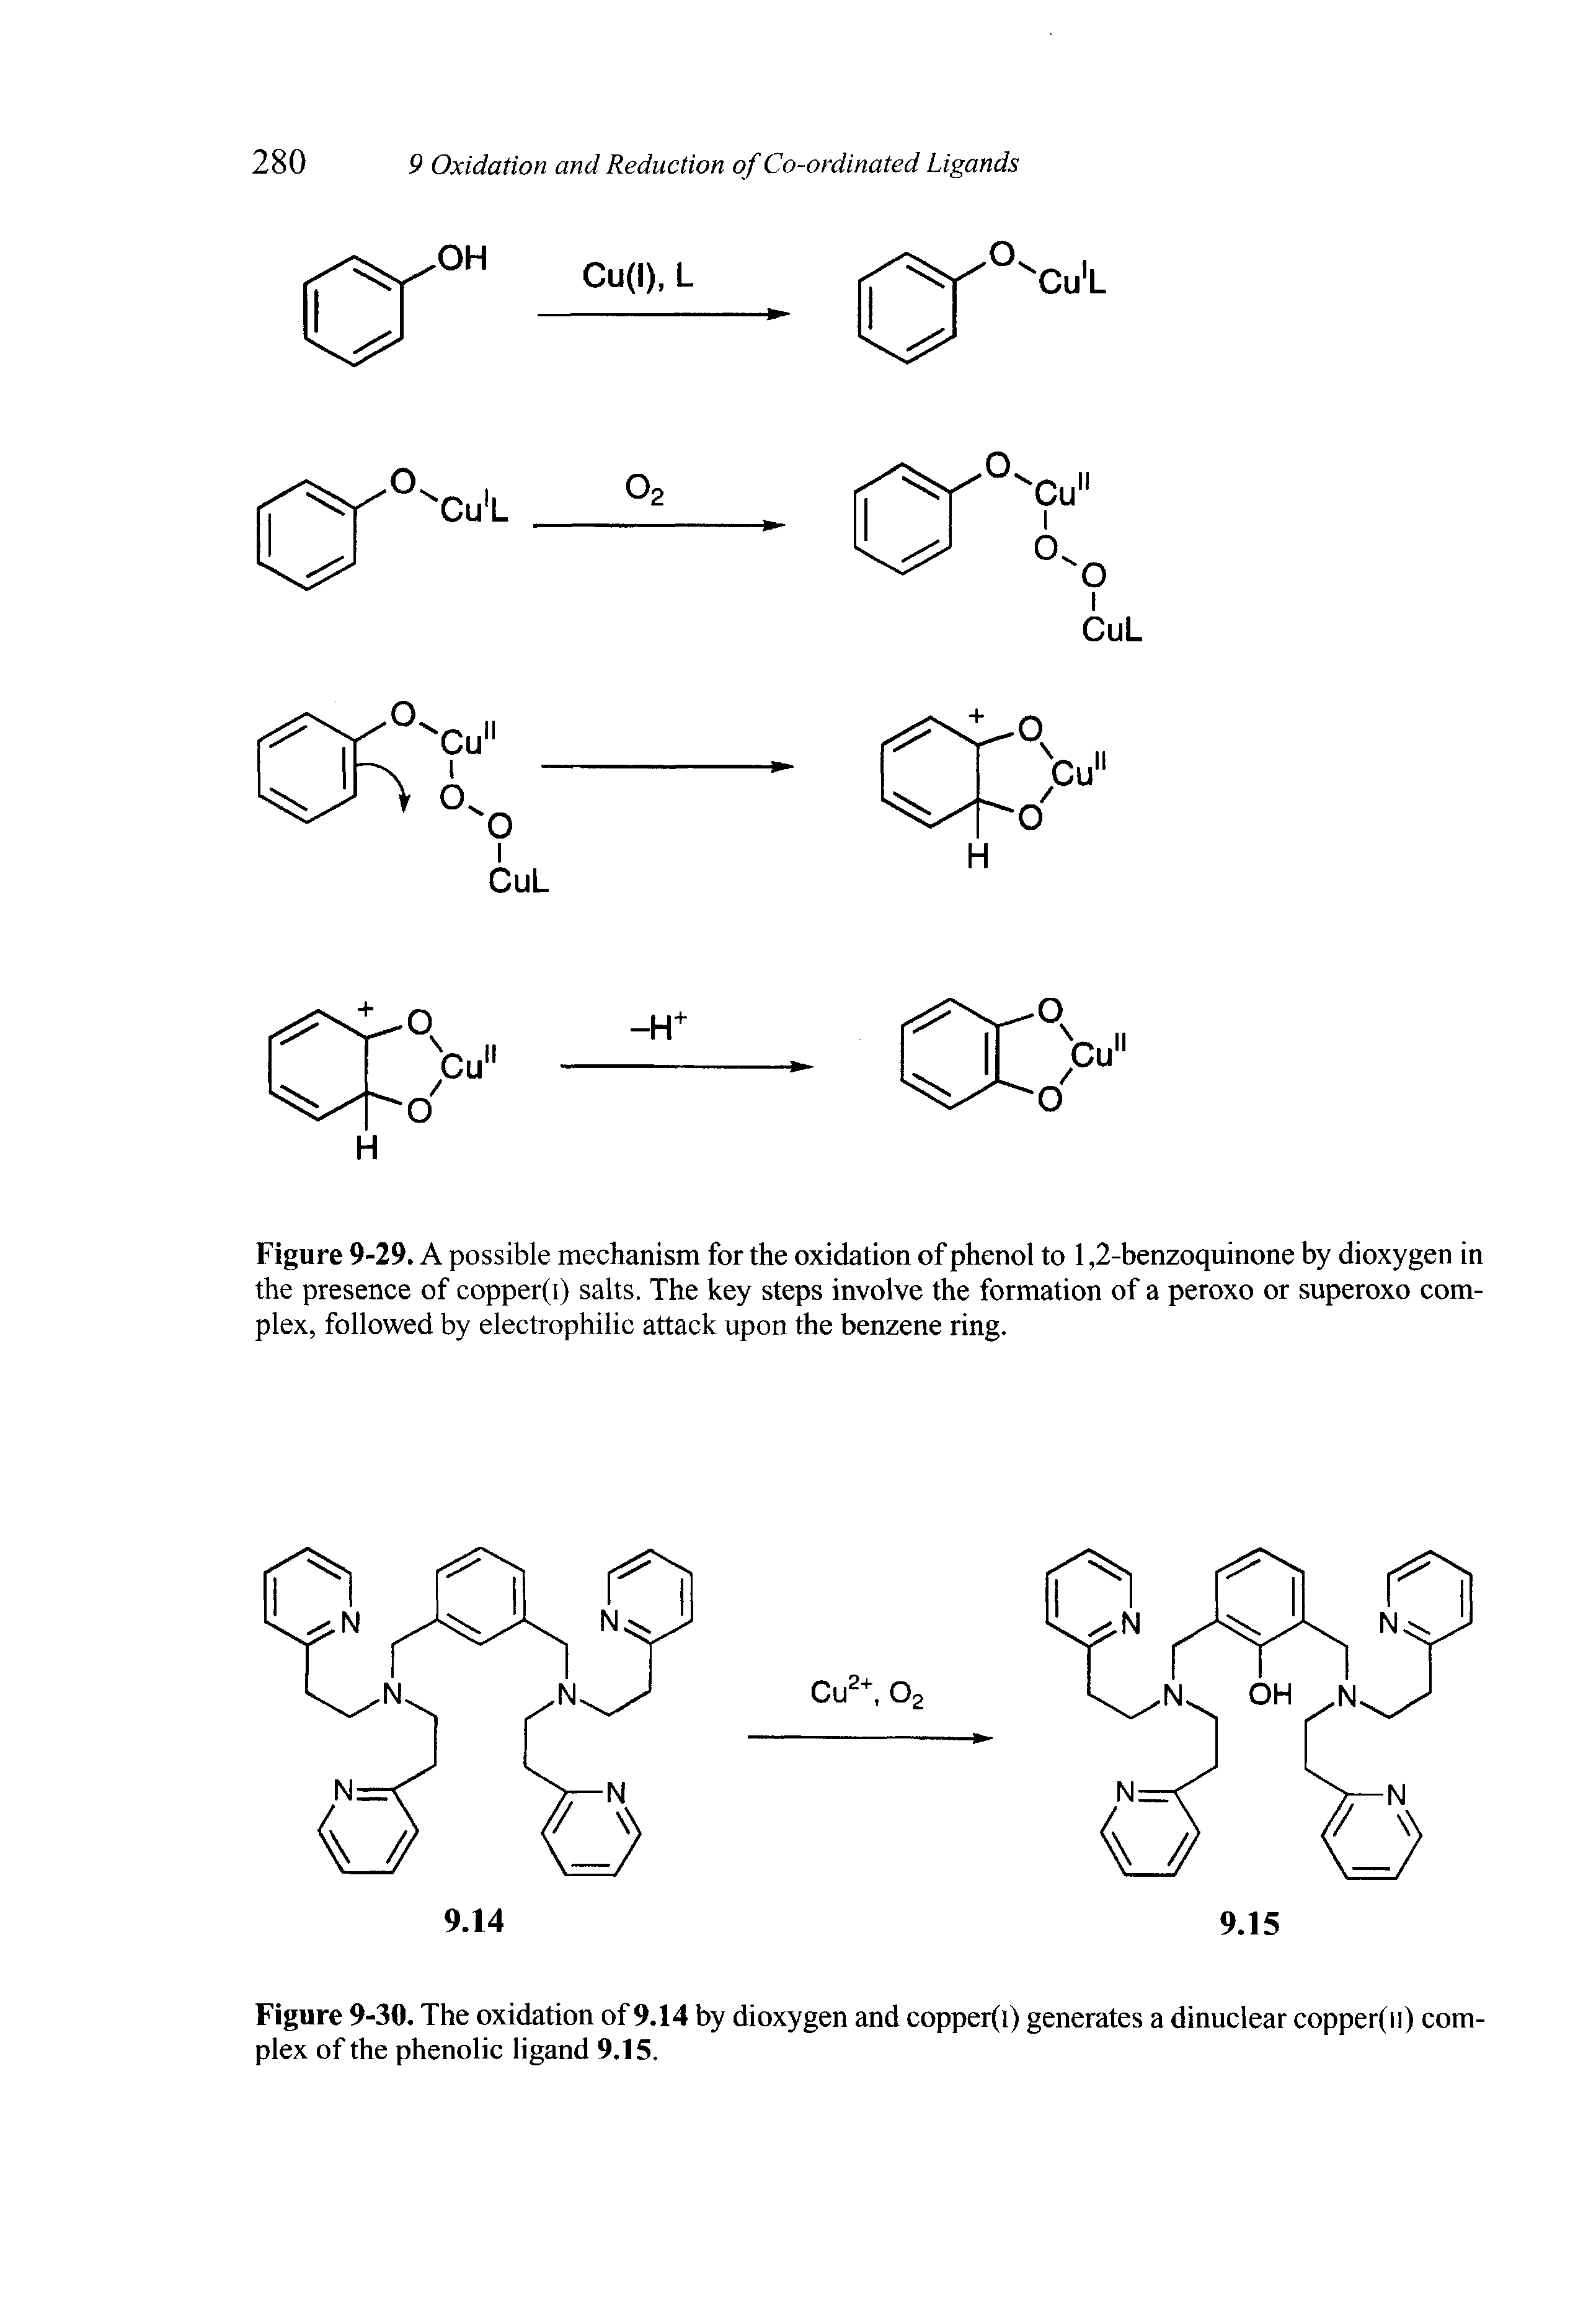 Figure 9-29. A possible mechanism for the oxidation of phenol to 1,2-benzoquinone by dioxygen in the presence of copper(i) salts. The key steps involve the formation of a peroxo or superoxo complex, followed by electrophilic attack upon the benzene ring.